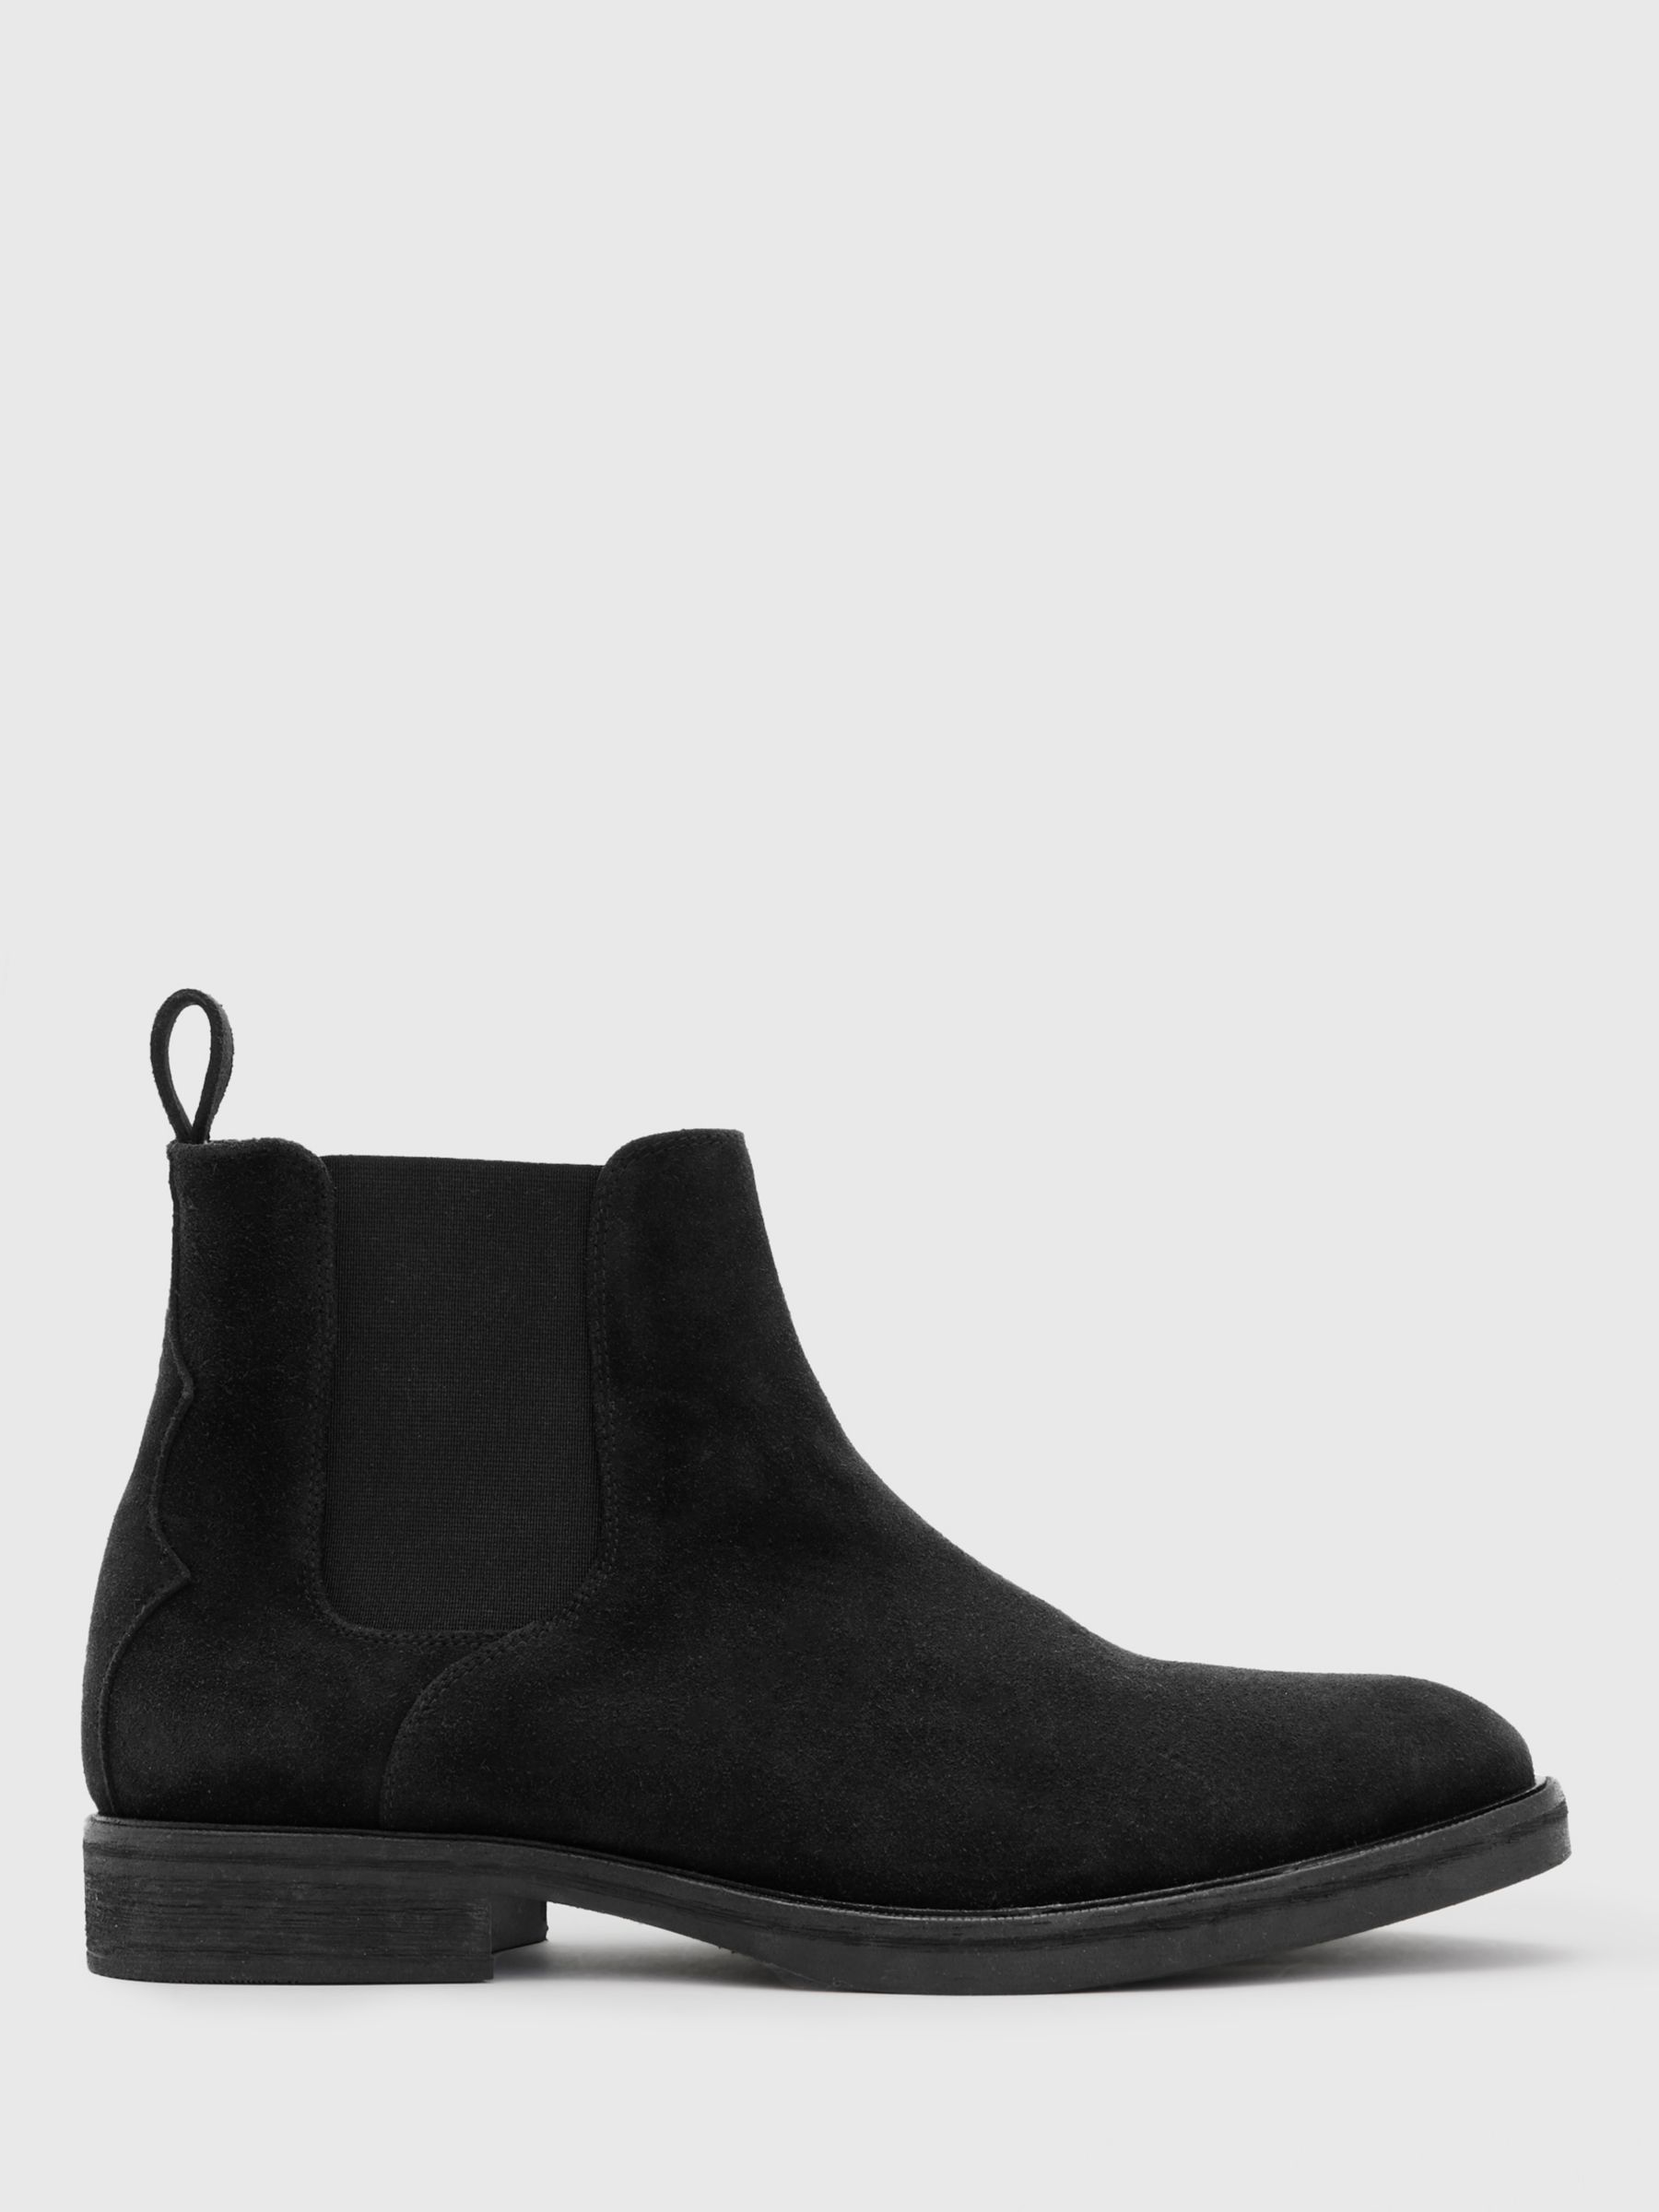 AllSaints Creed Suede Chelsea Boots, Black, 8